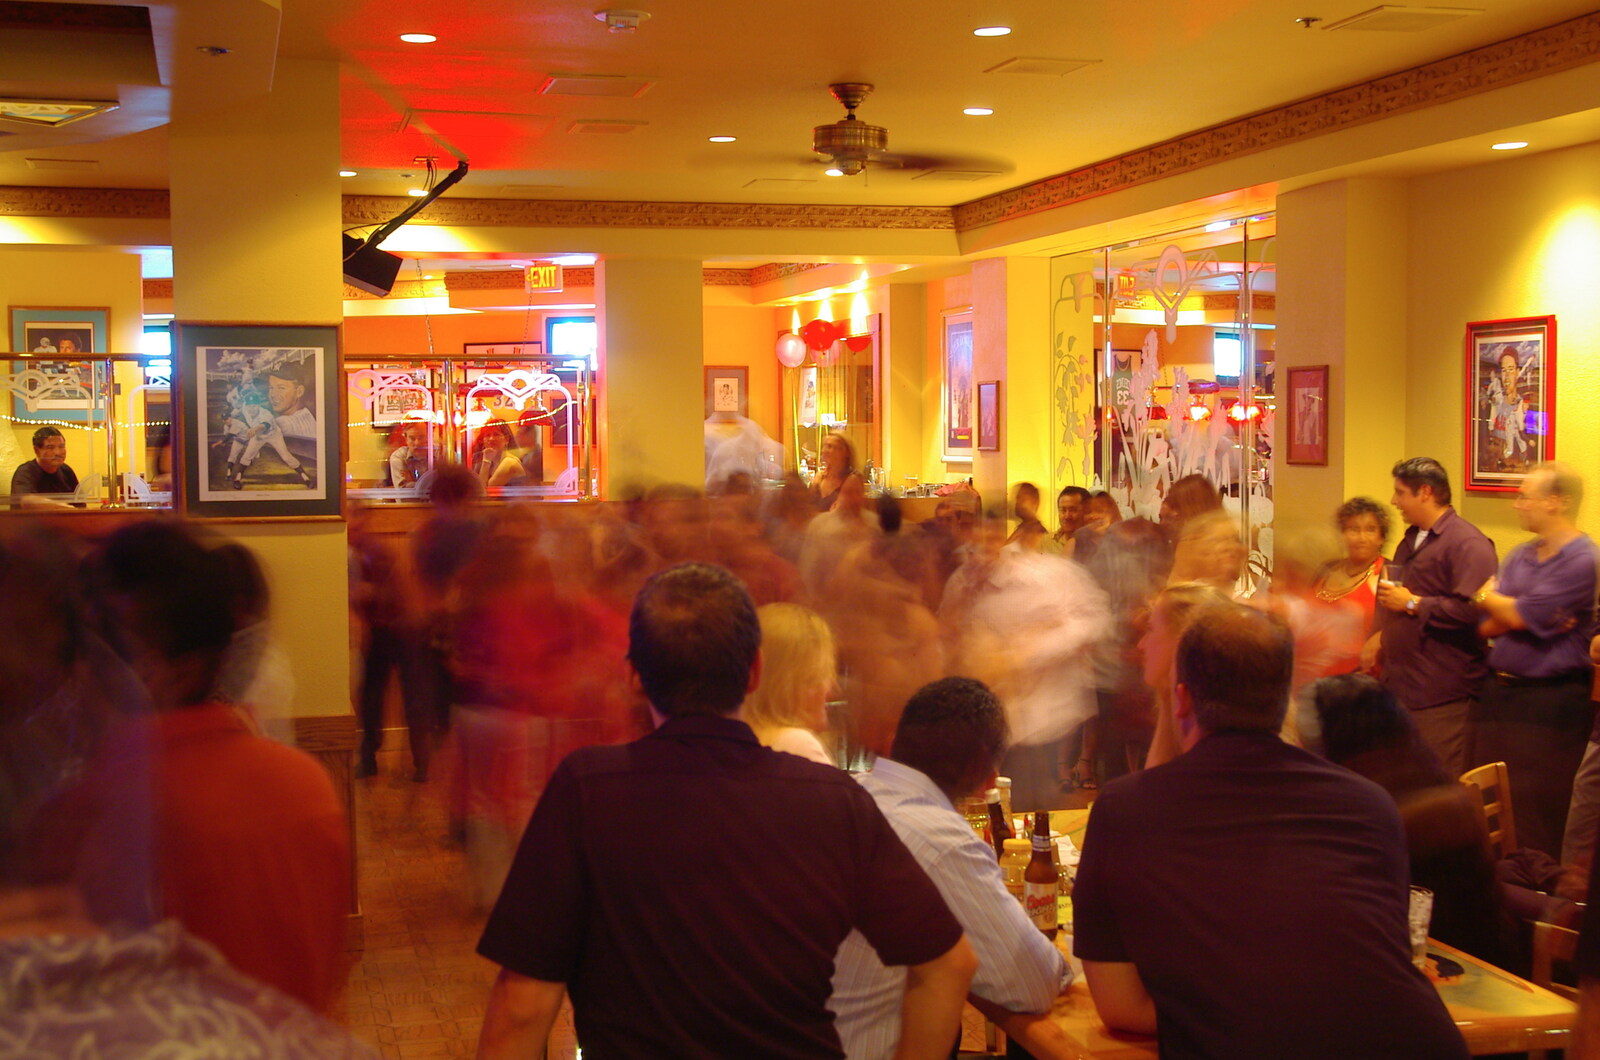 The scene in the Marriott Hotel bar from San Diego Four, California, US - 22nd September 2005